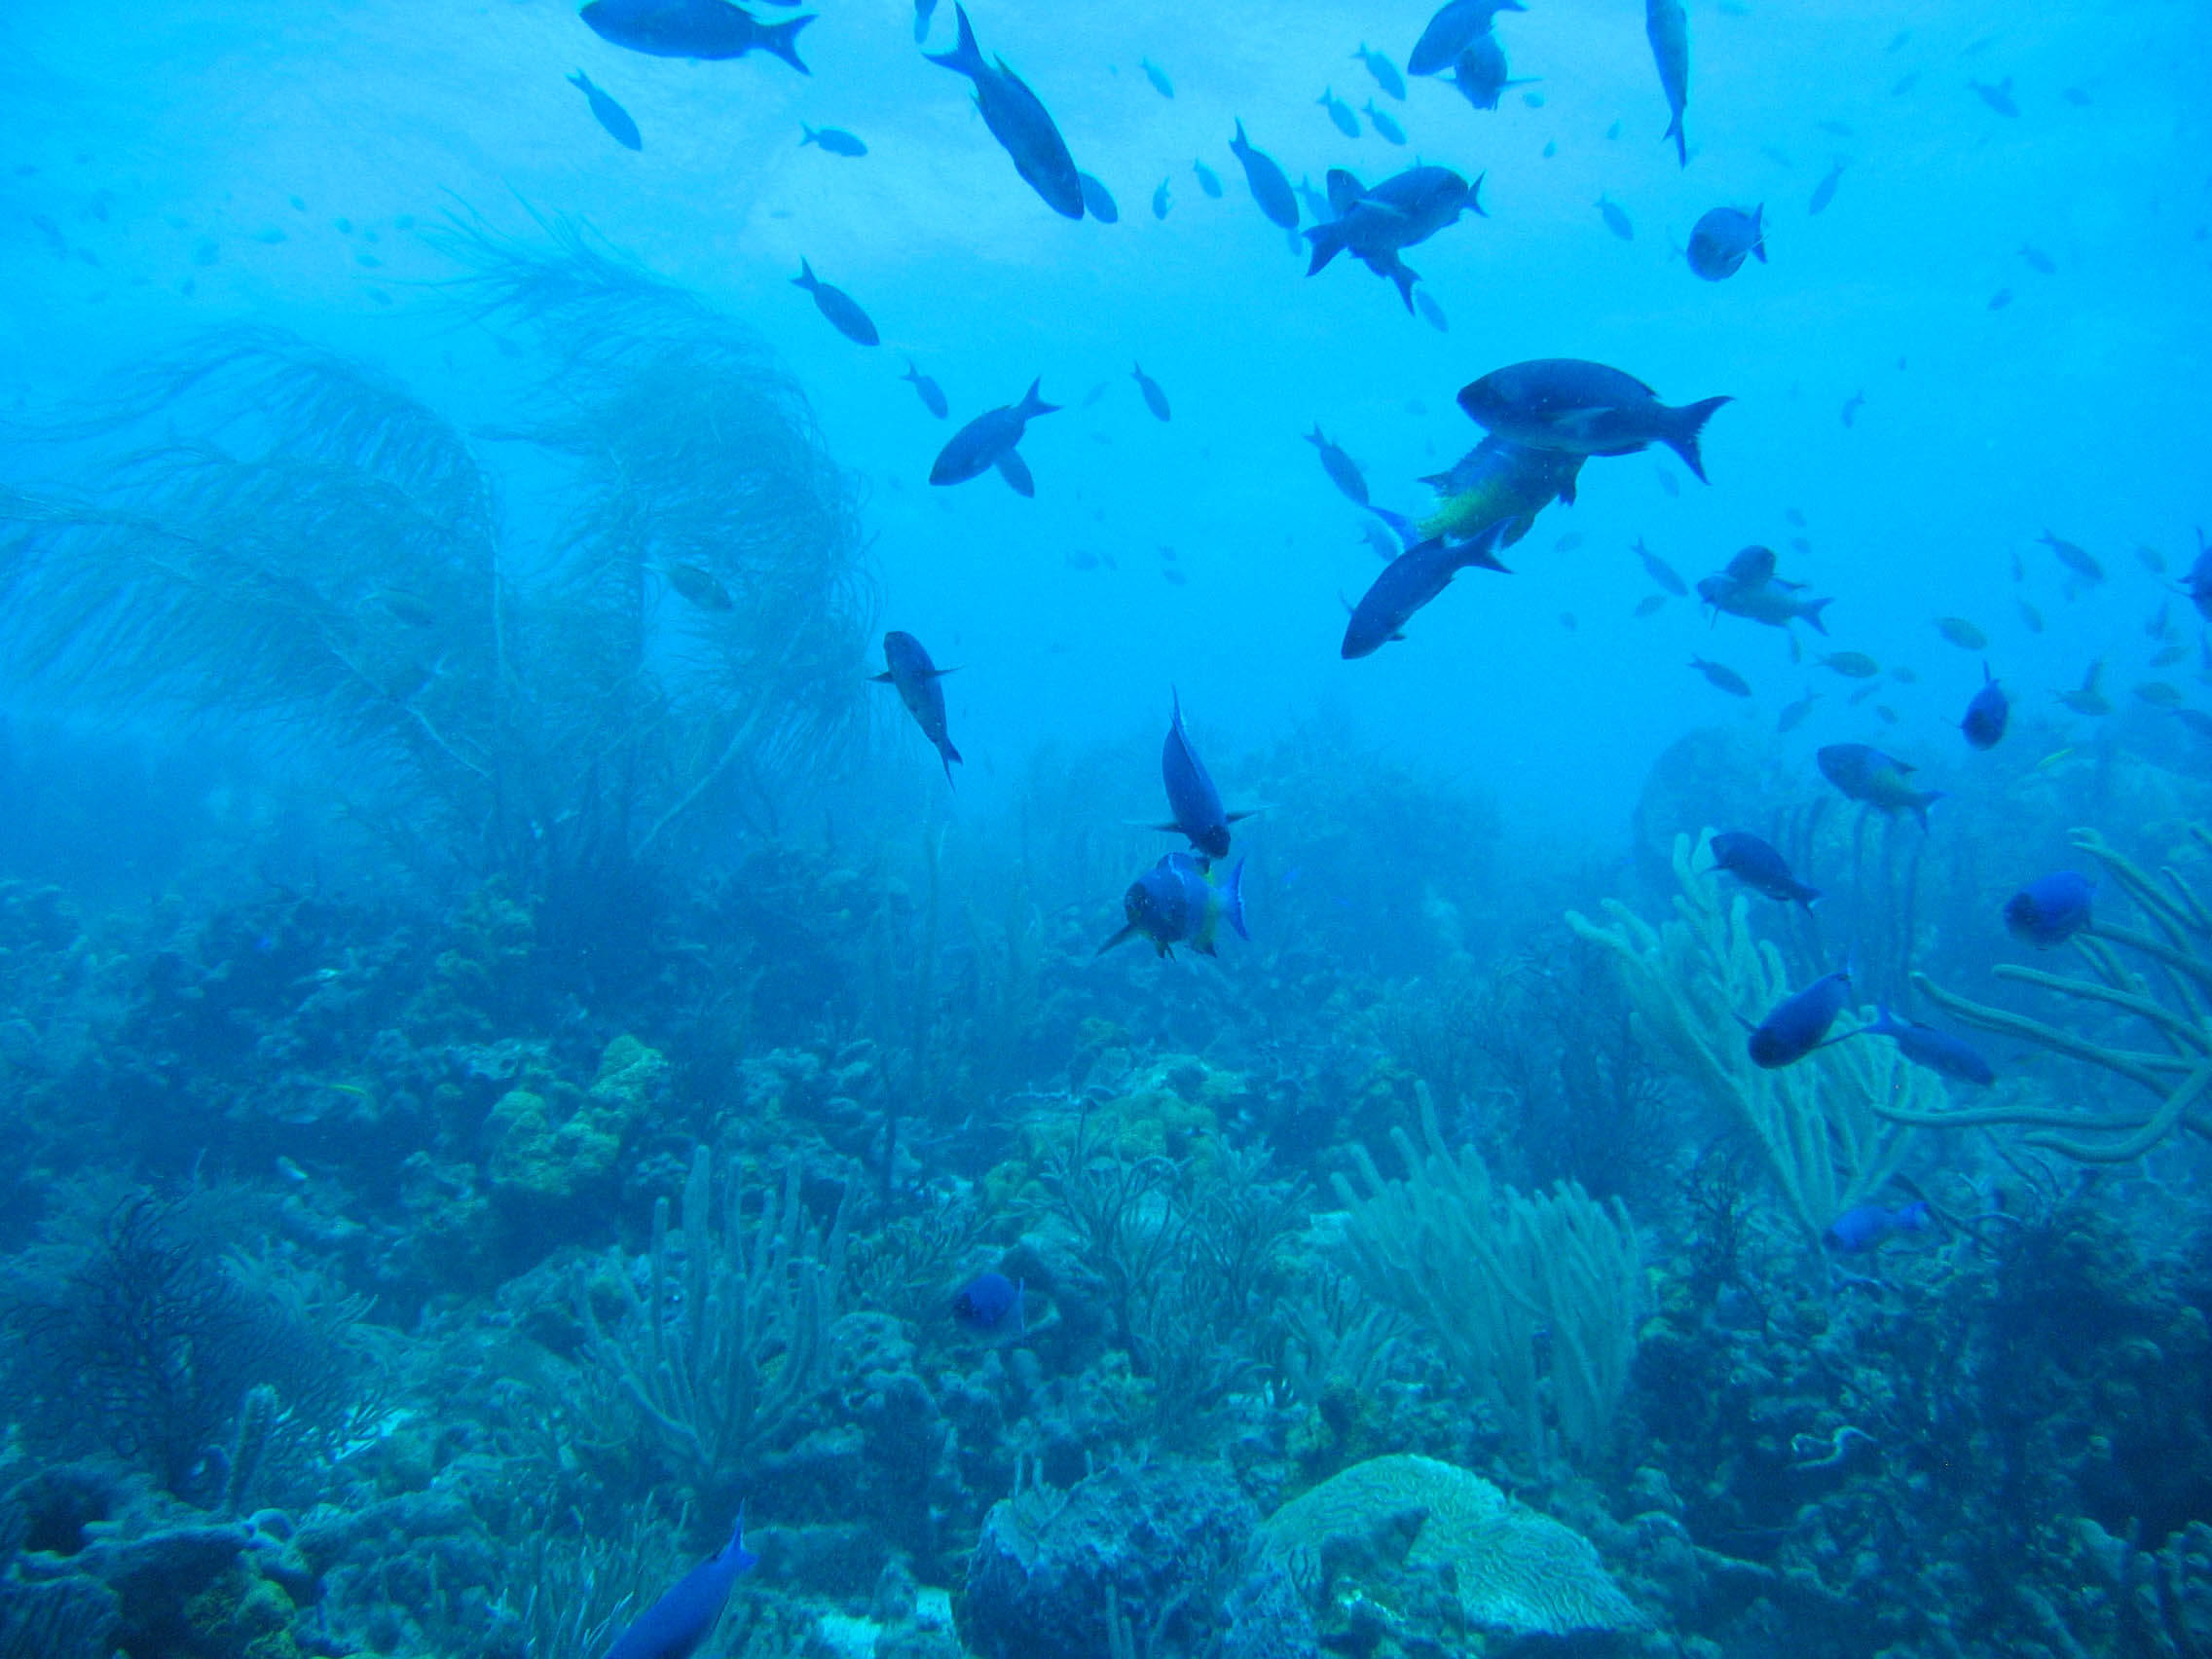 Typical Tobago reef scene